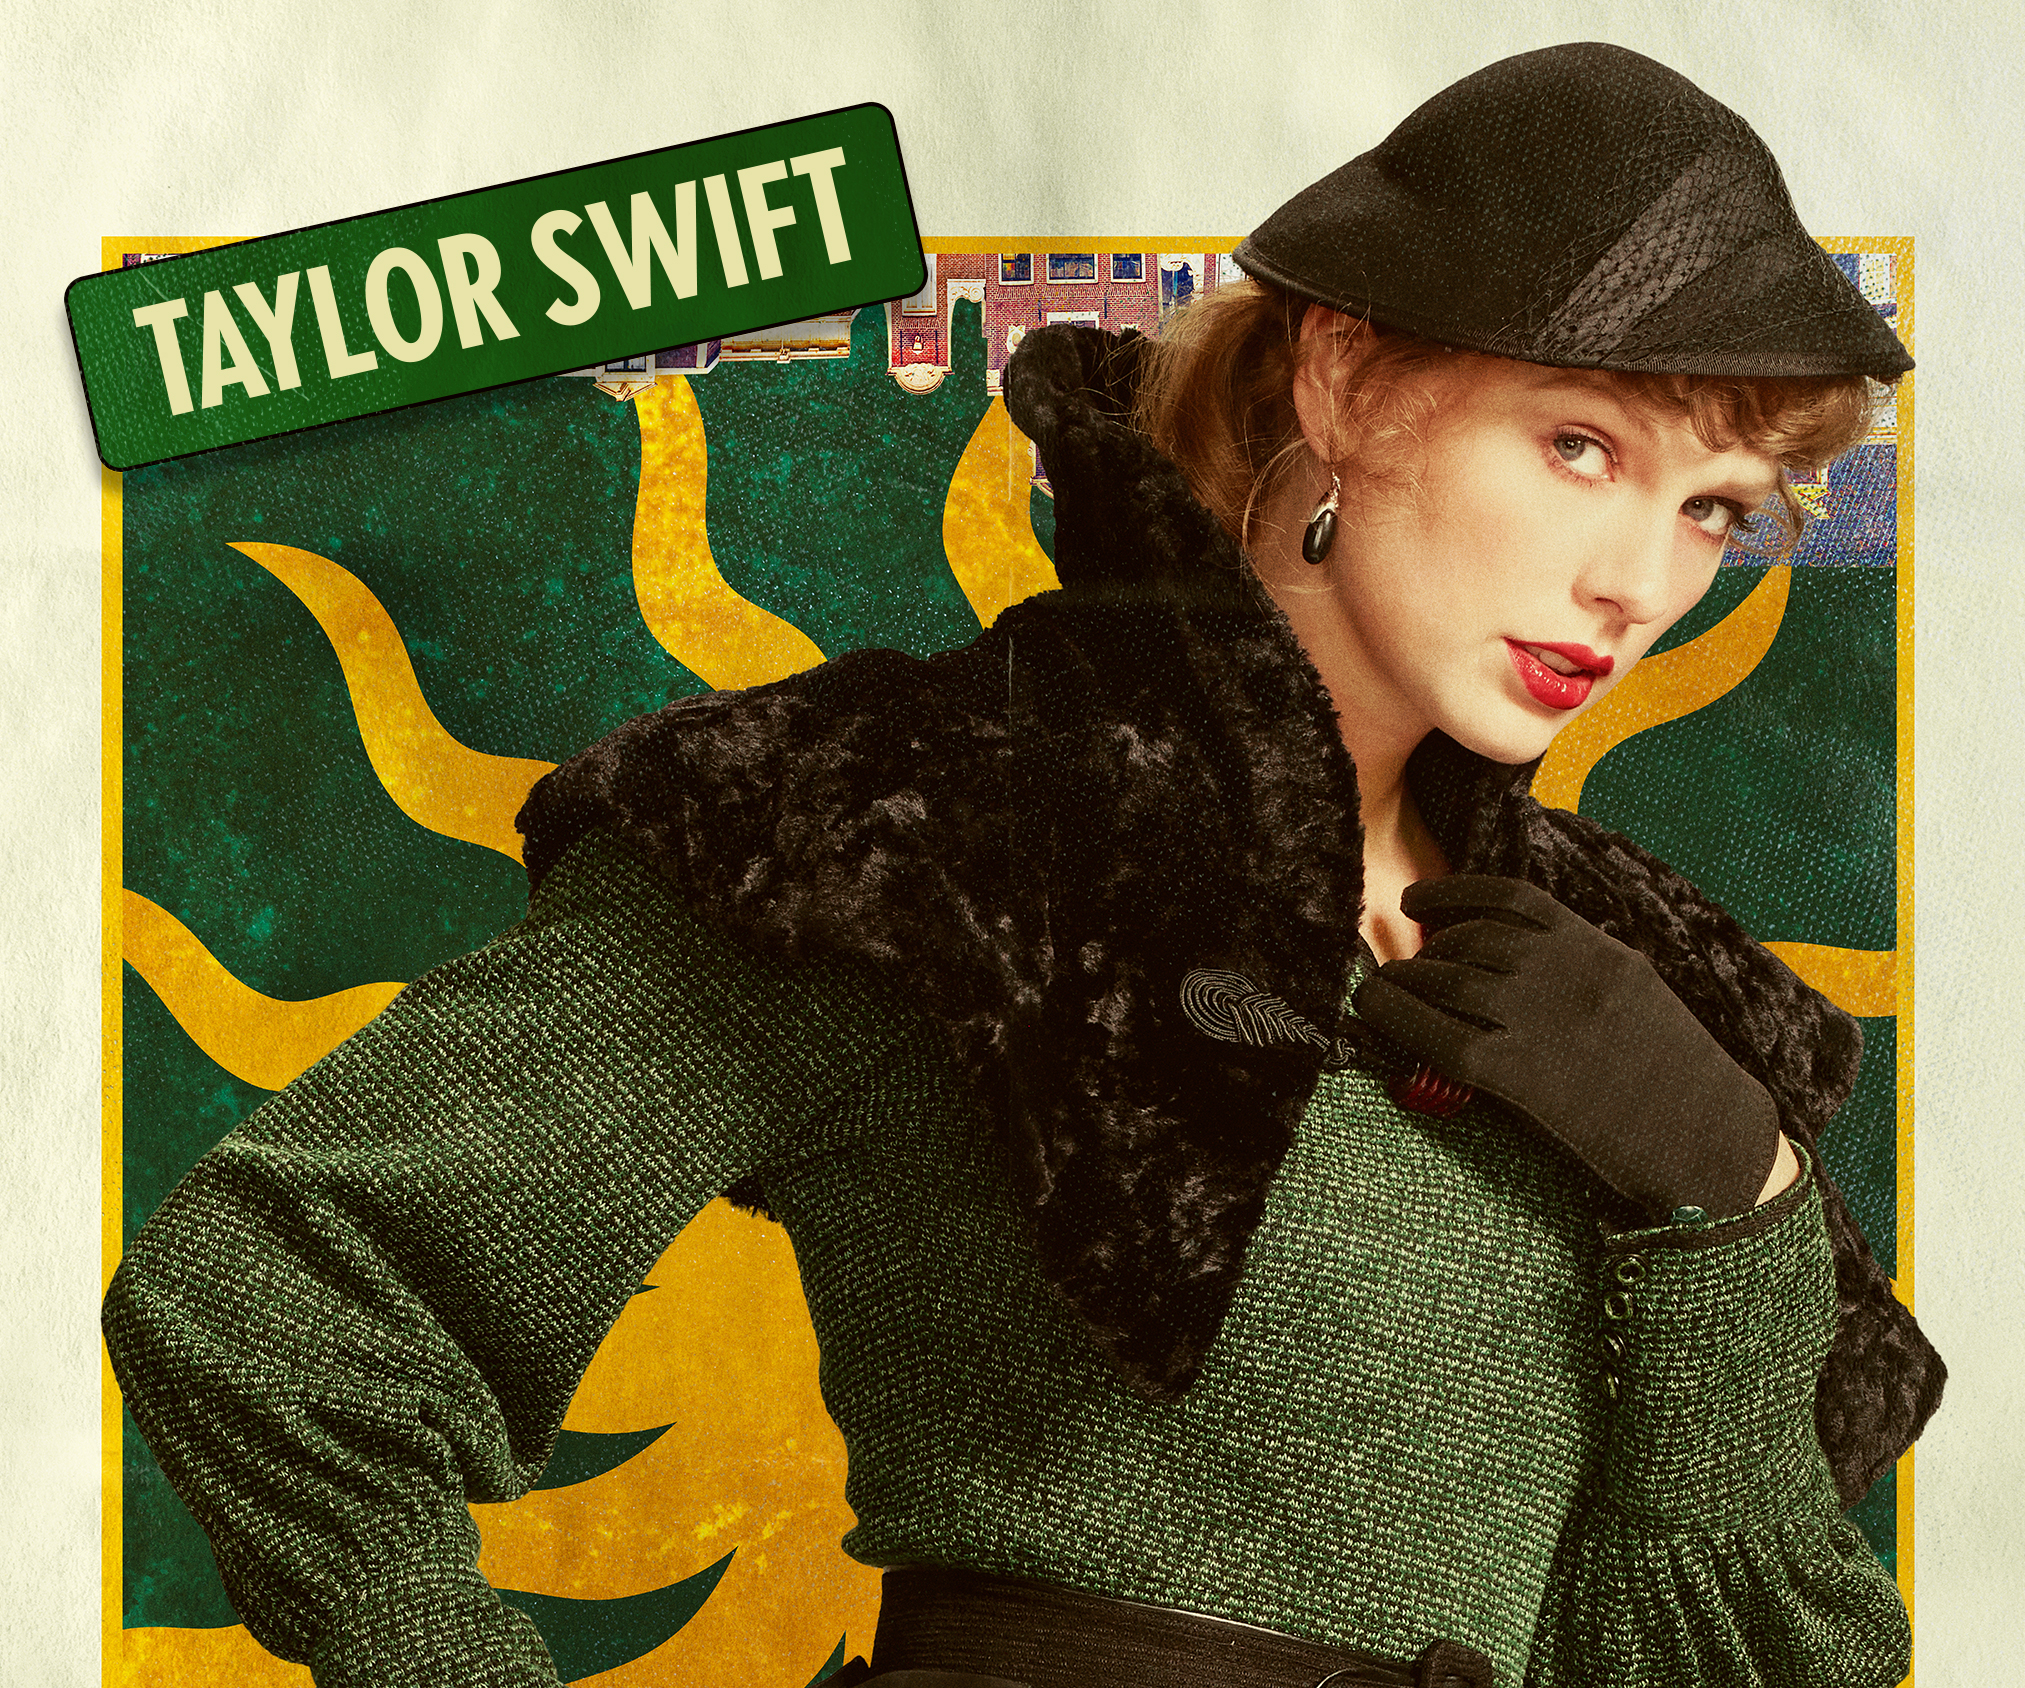 Taylor Swift 1920x1080 Resolution Wallpapers Laptop Full HD 1080P